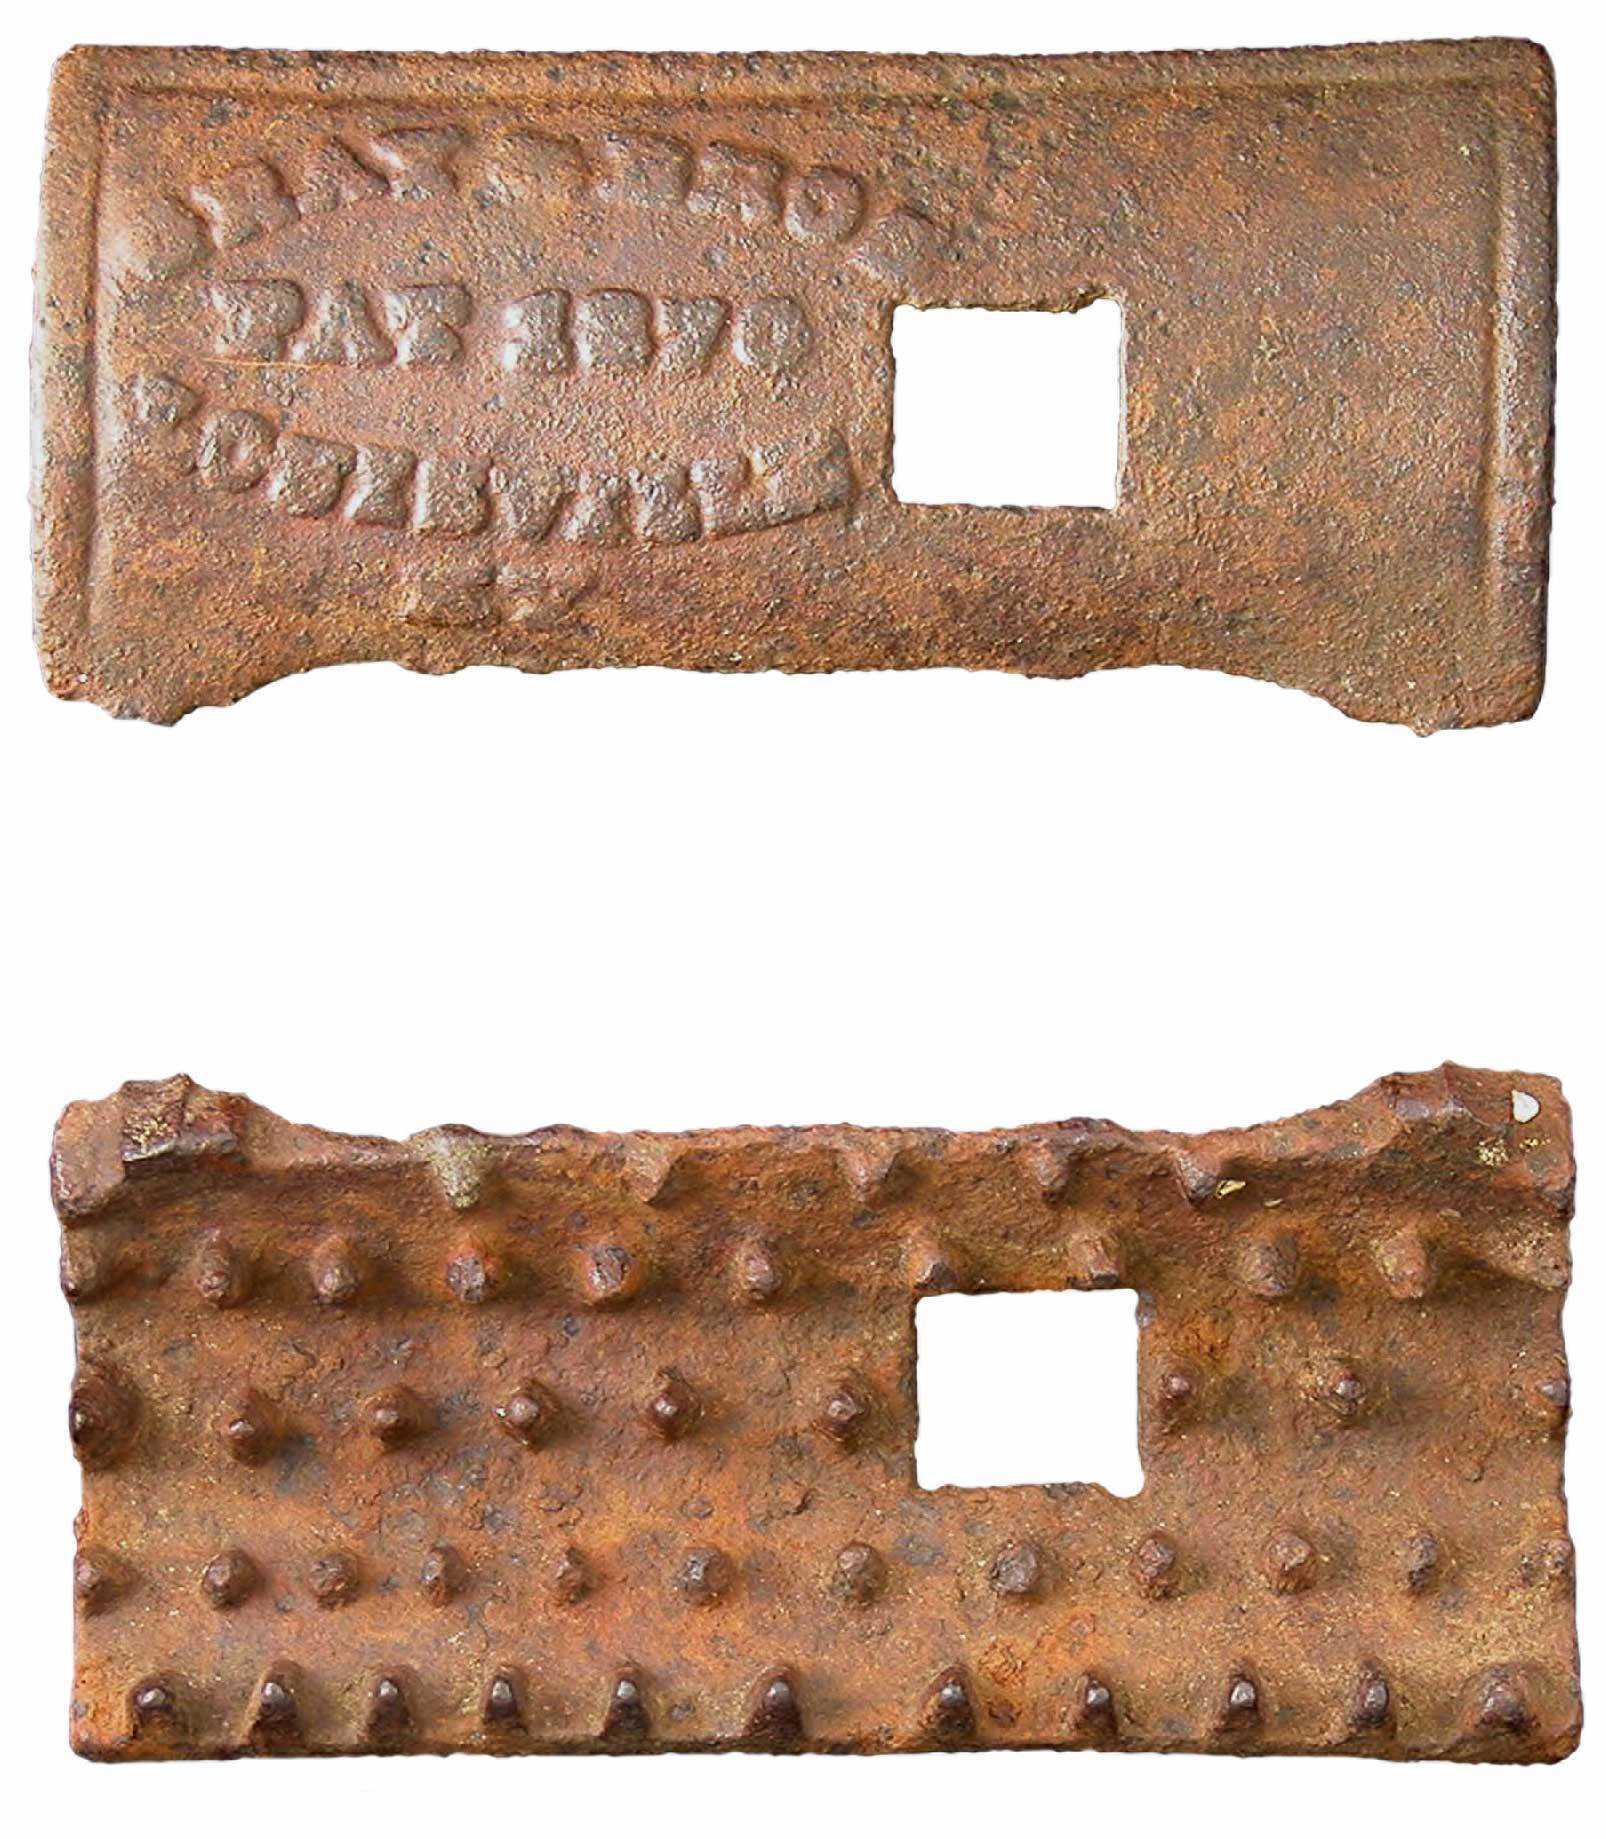 2 parts of an iron corn sheller embossed with "Bray Bros  Pat 1870"